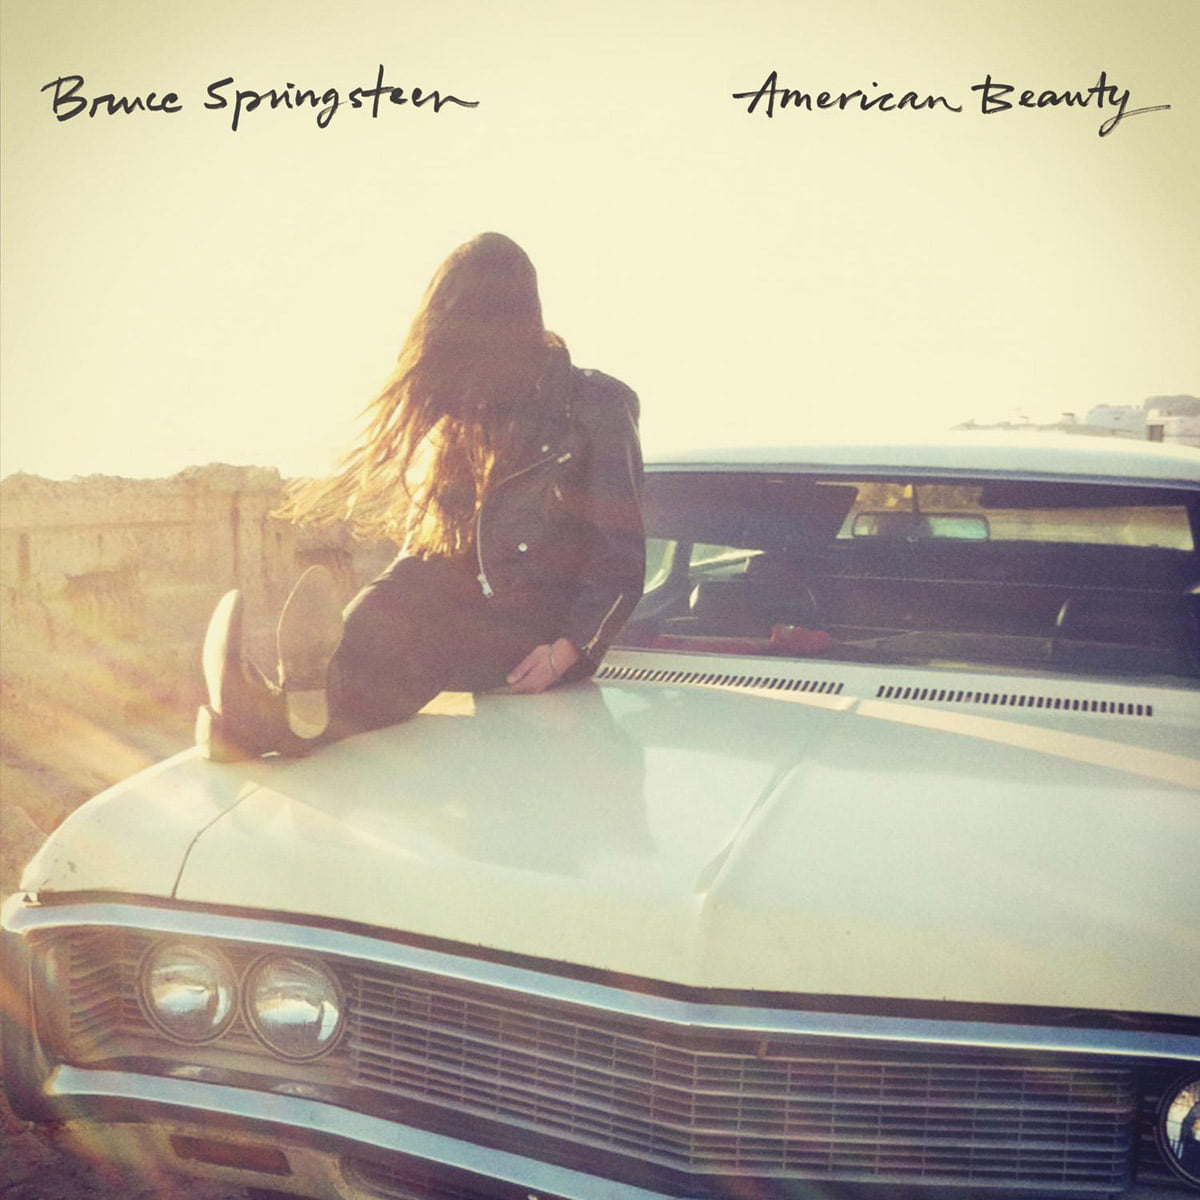 Bruce Springsteen American Beauty front cover